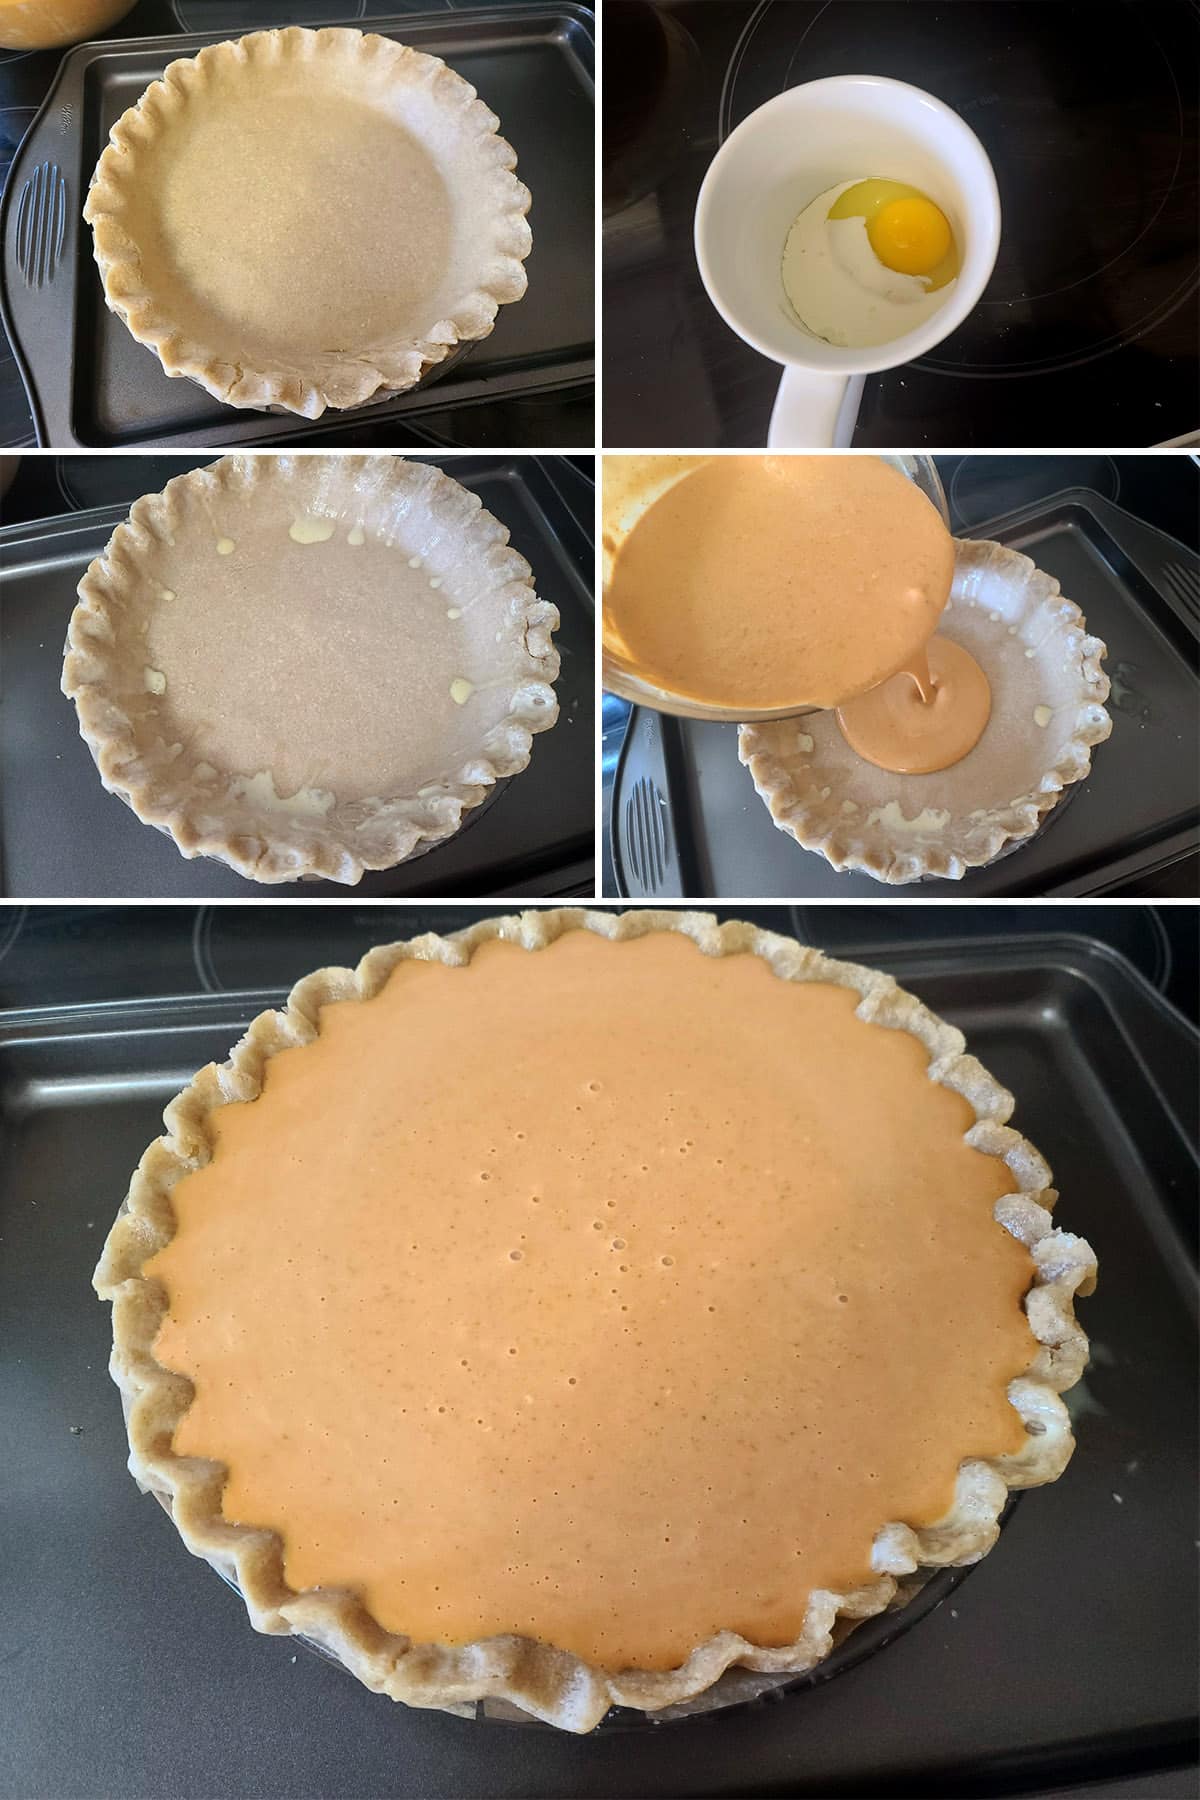 A 5 part image showing the egg wash being mixed, brushed on the crust, and the crust filled with pie filling.